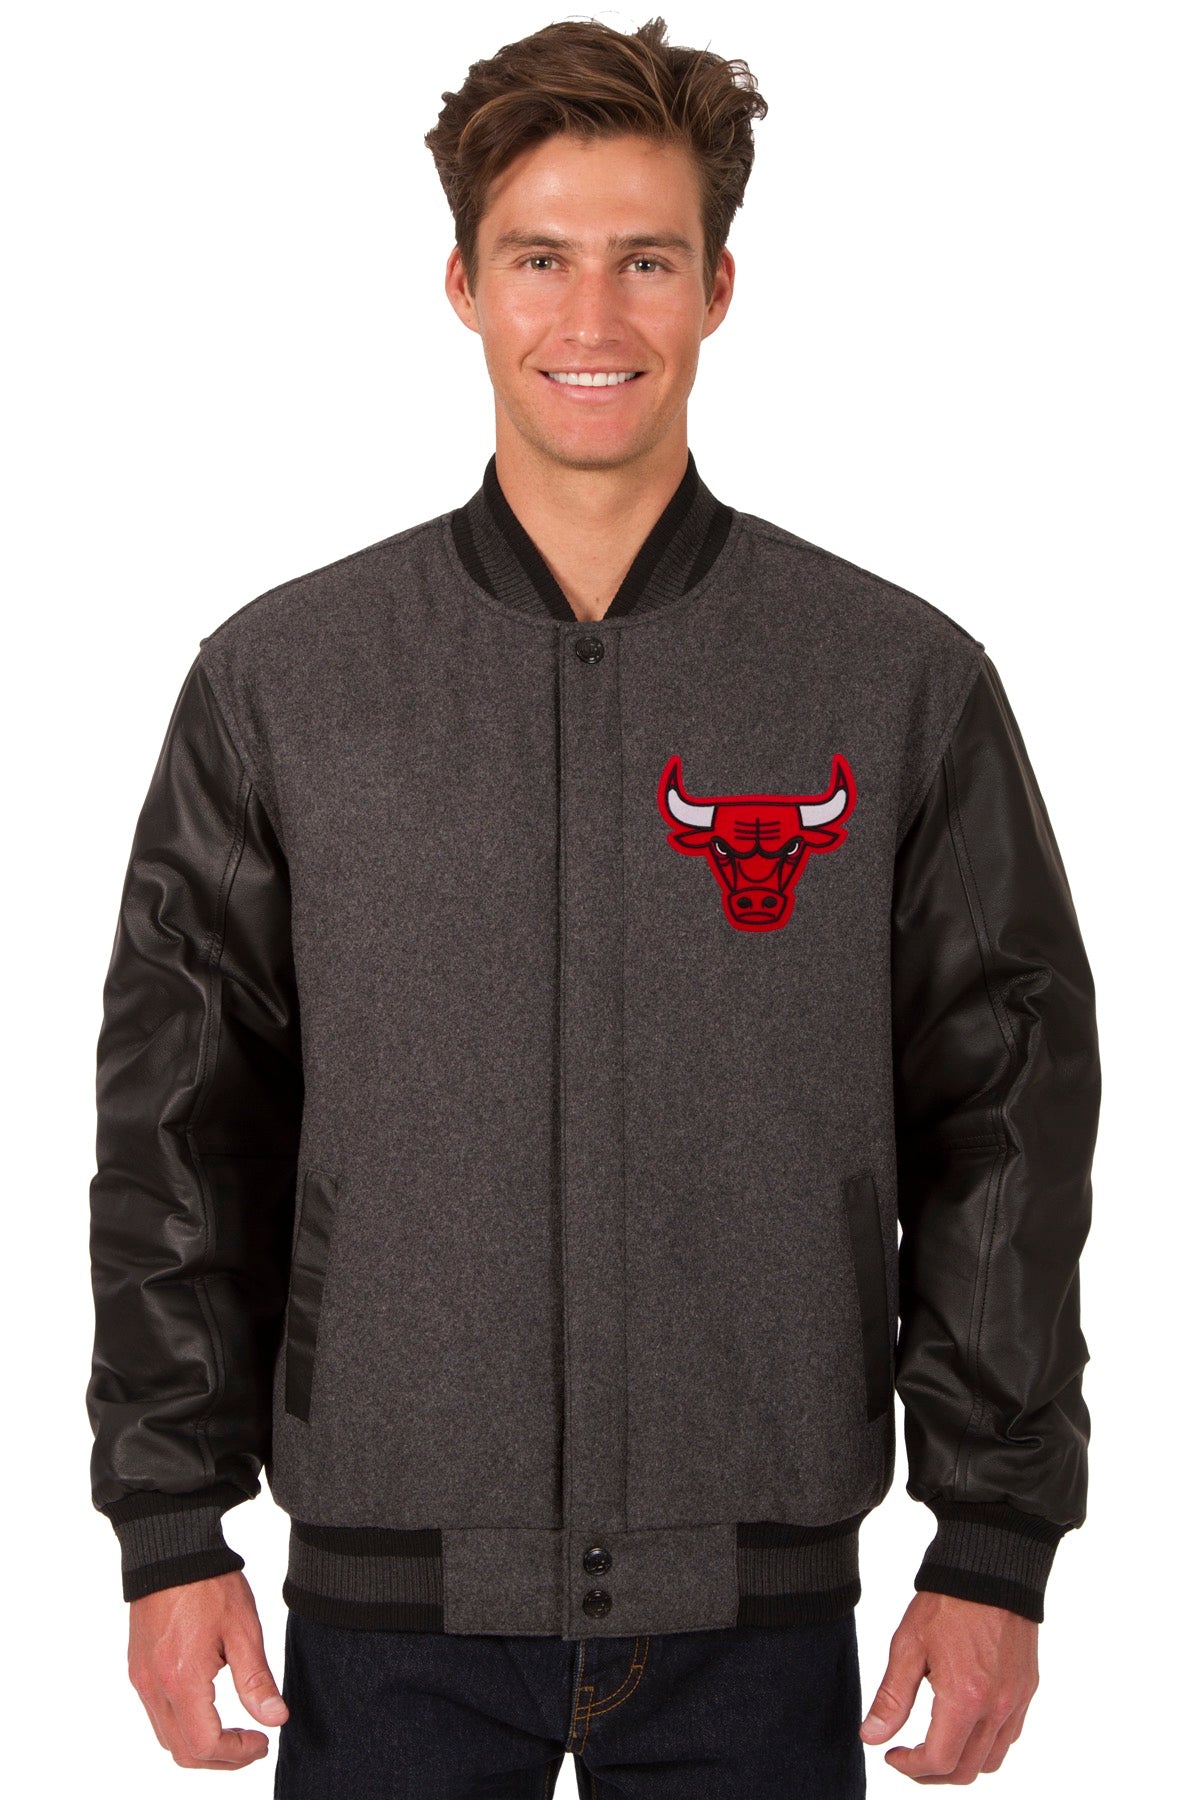 Chicago Bulls Wool & Leather Reversible Jacket w/ Embroidered